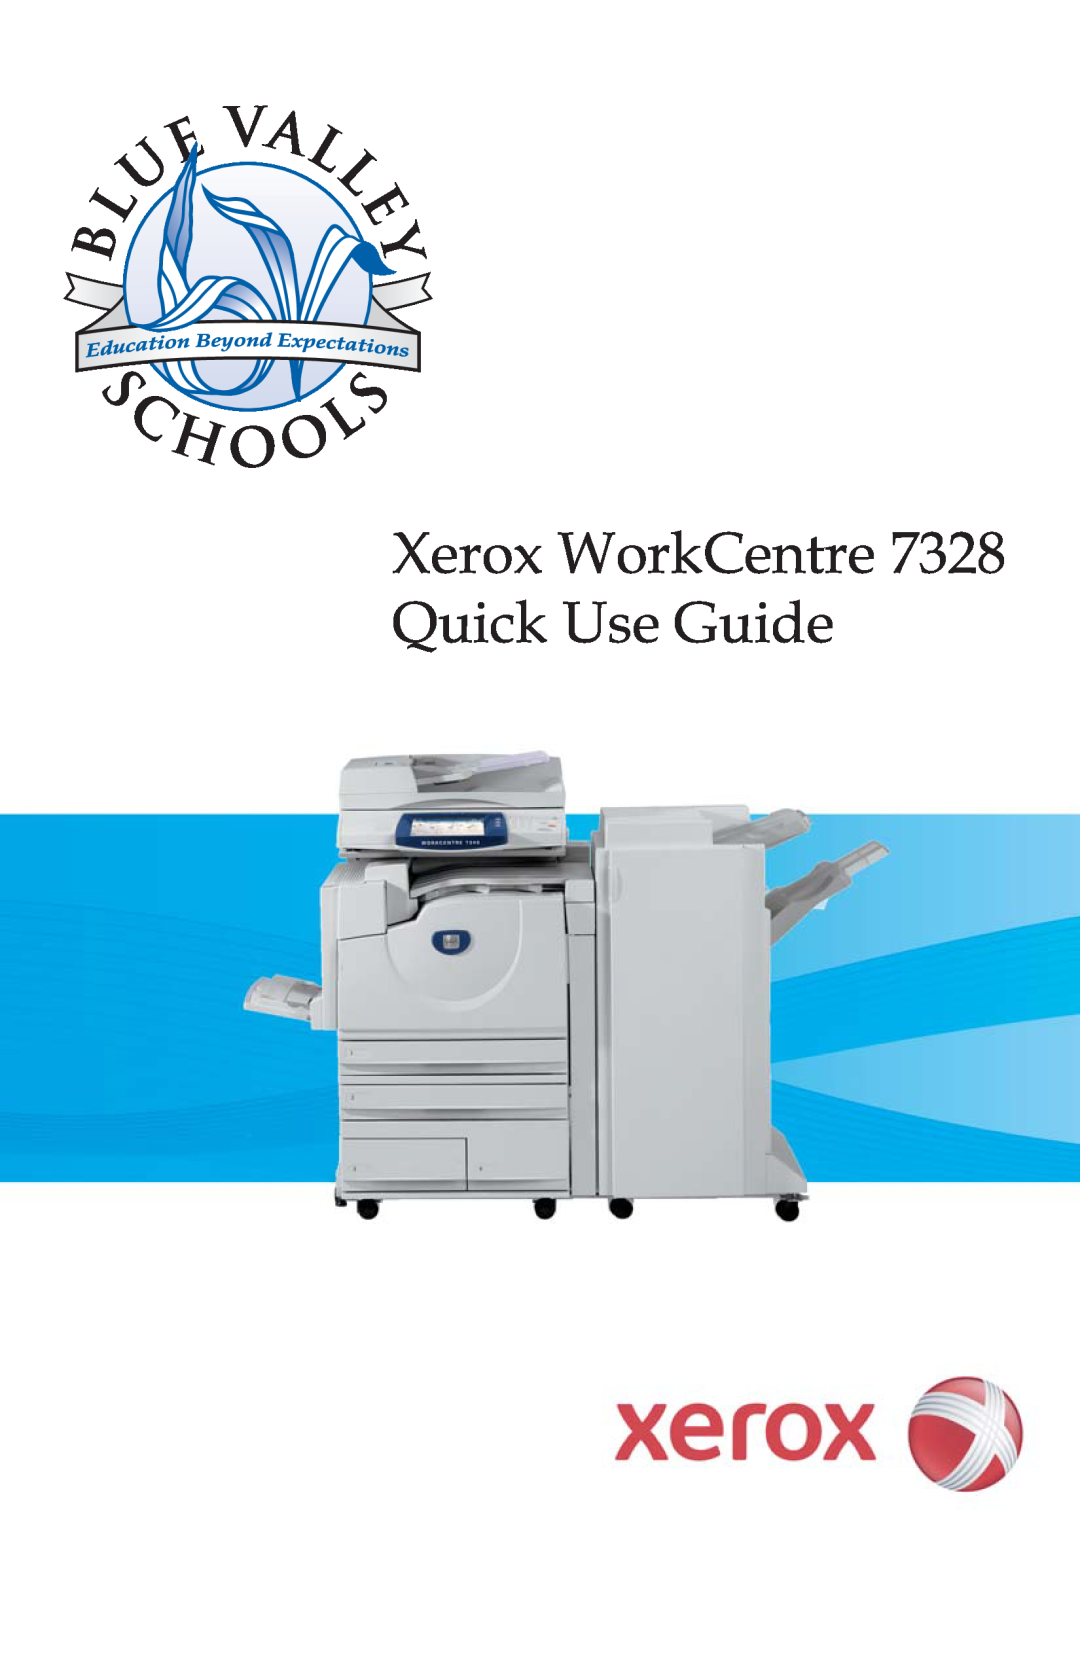 Xerox manual Quick Use Guide, WorkCentre 7328/7335/7345, 701P46053 